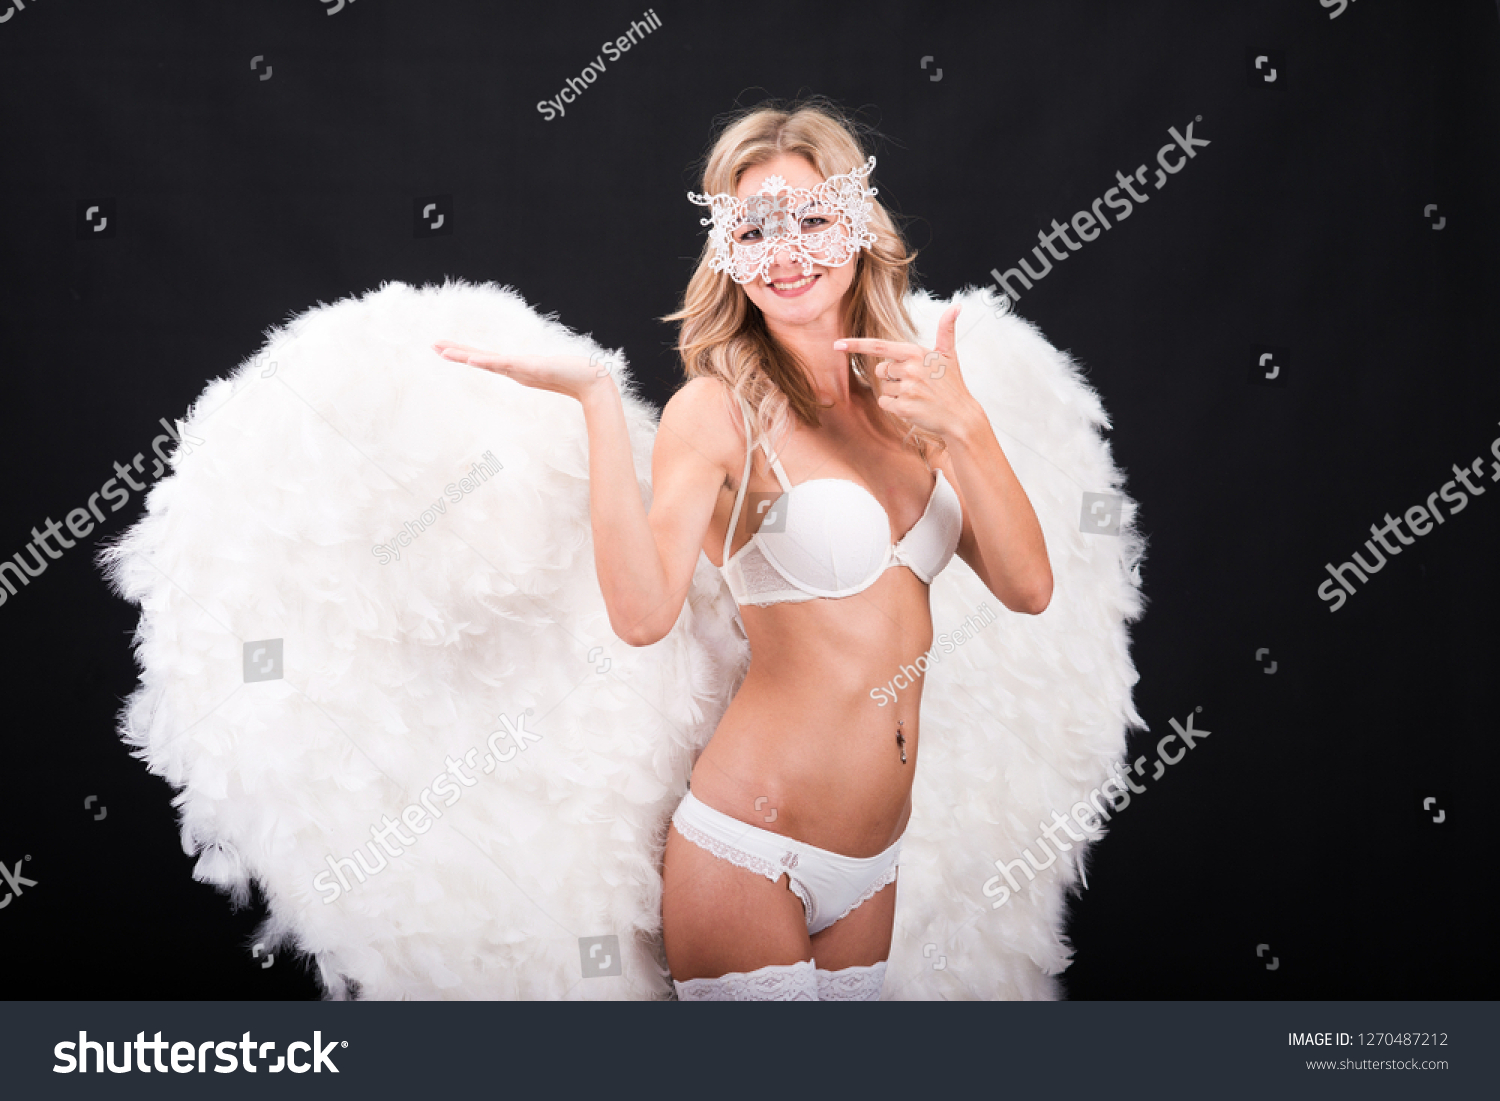 Angel in white underclothes